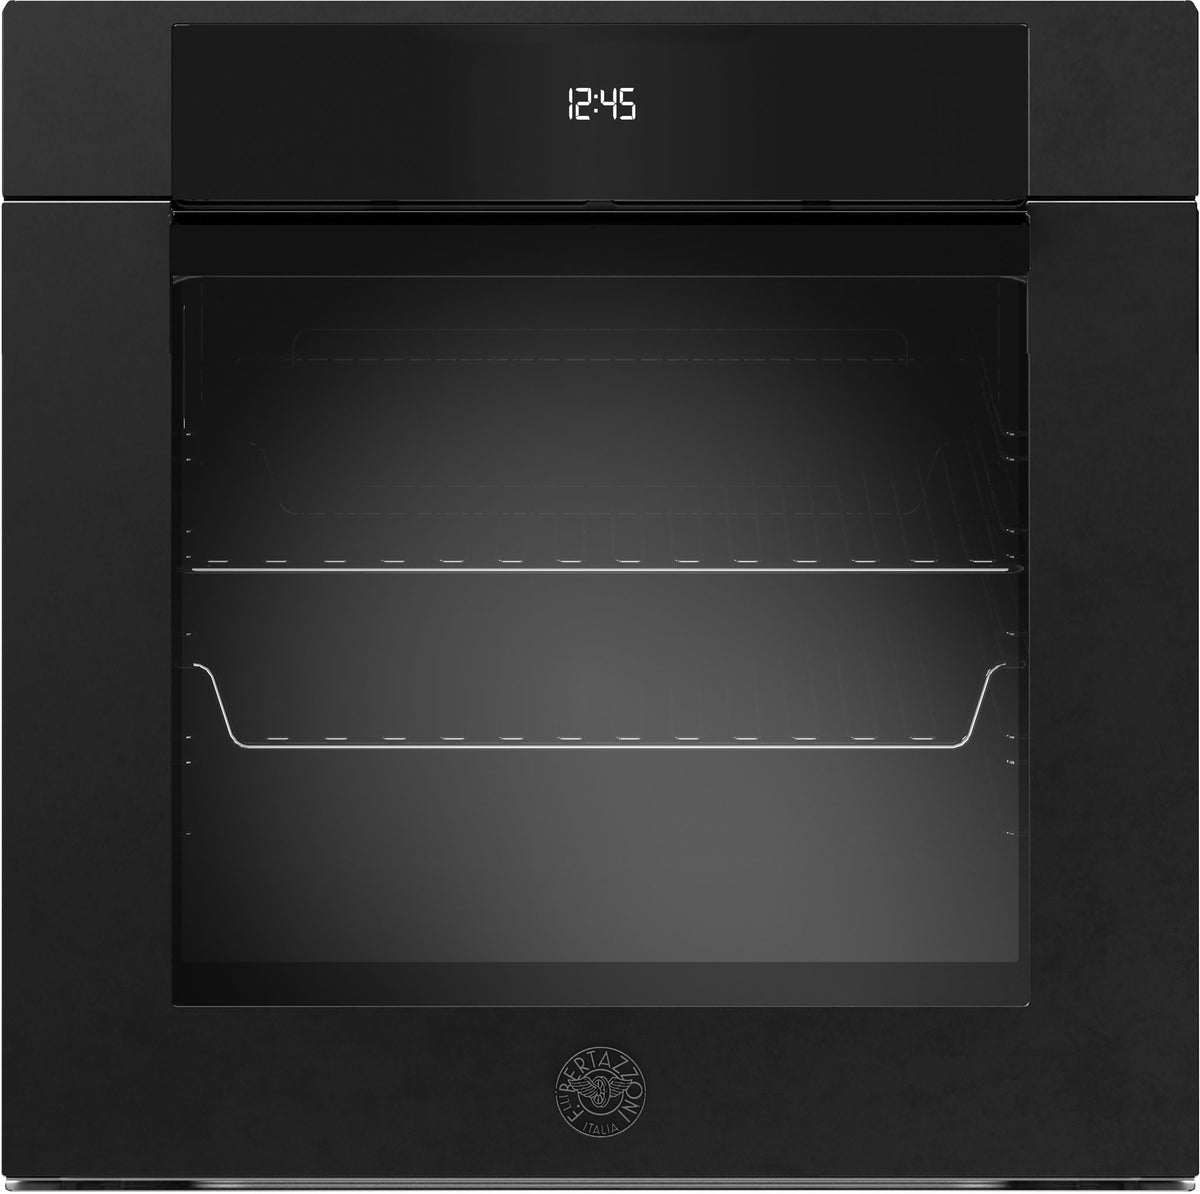 BERTAZZONI F6011MODPLN 60cm Electric Multifunction Oven with Pyrolytic cleaning in Carbonio